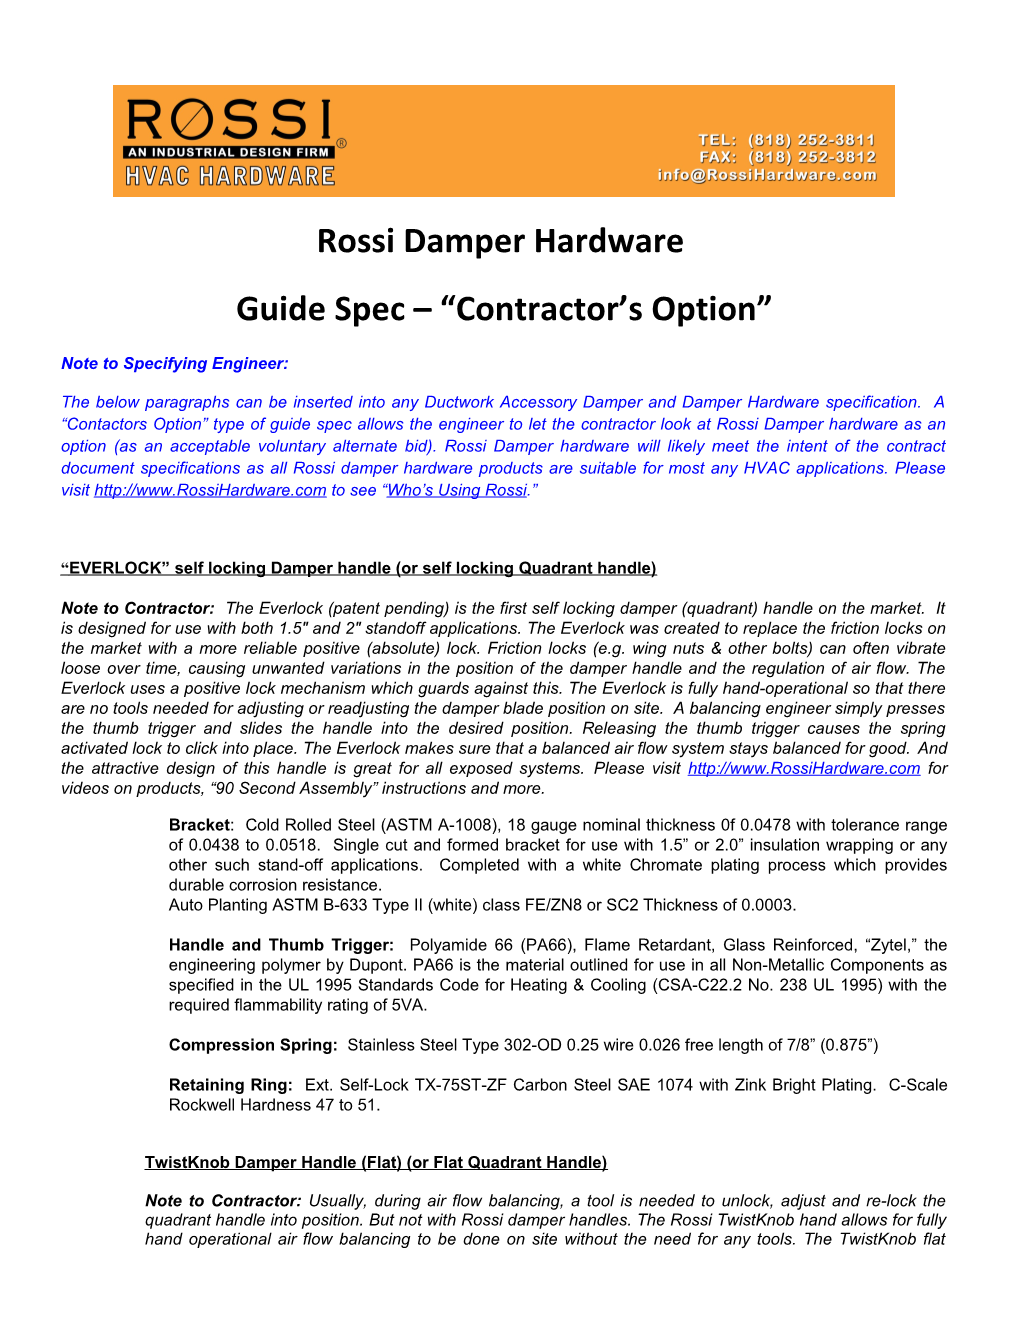 Guide Spec Contractor S Option